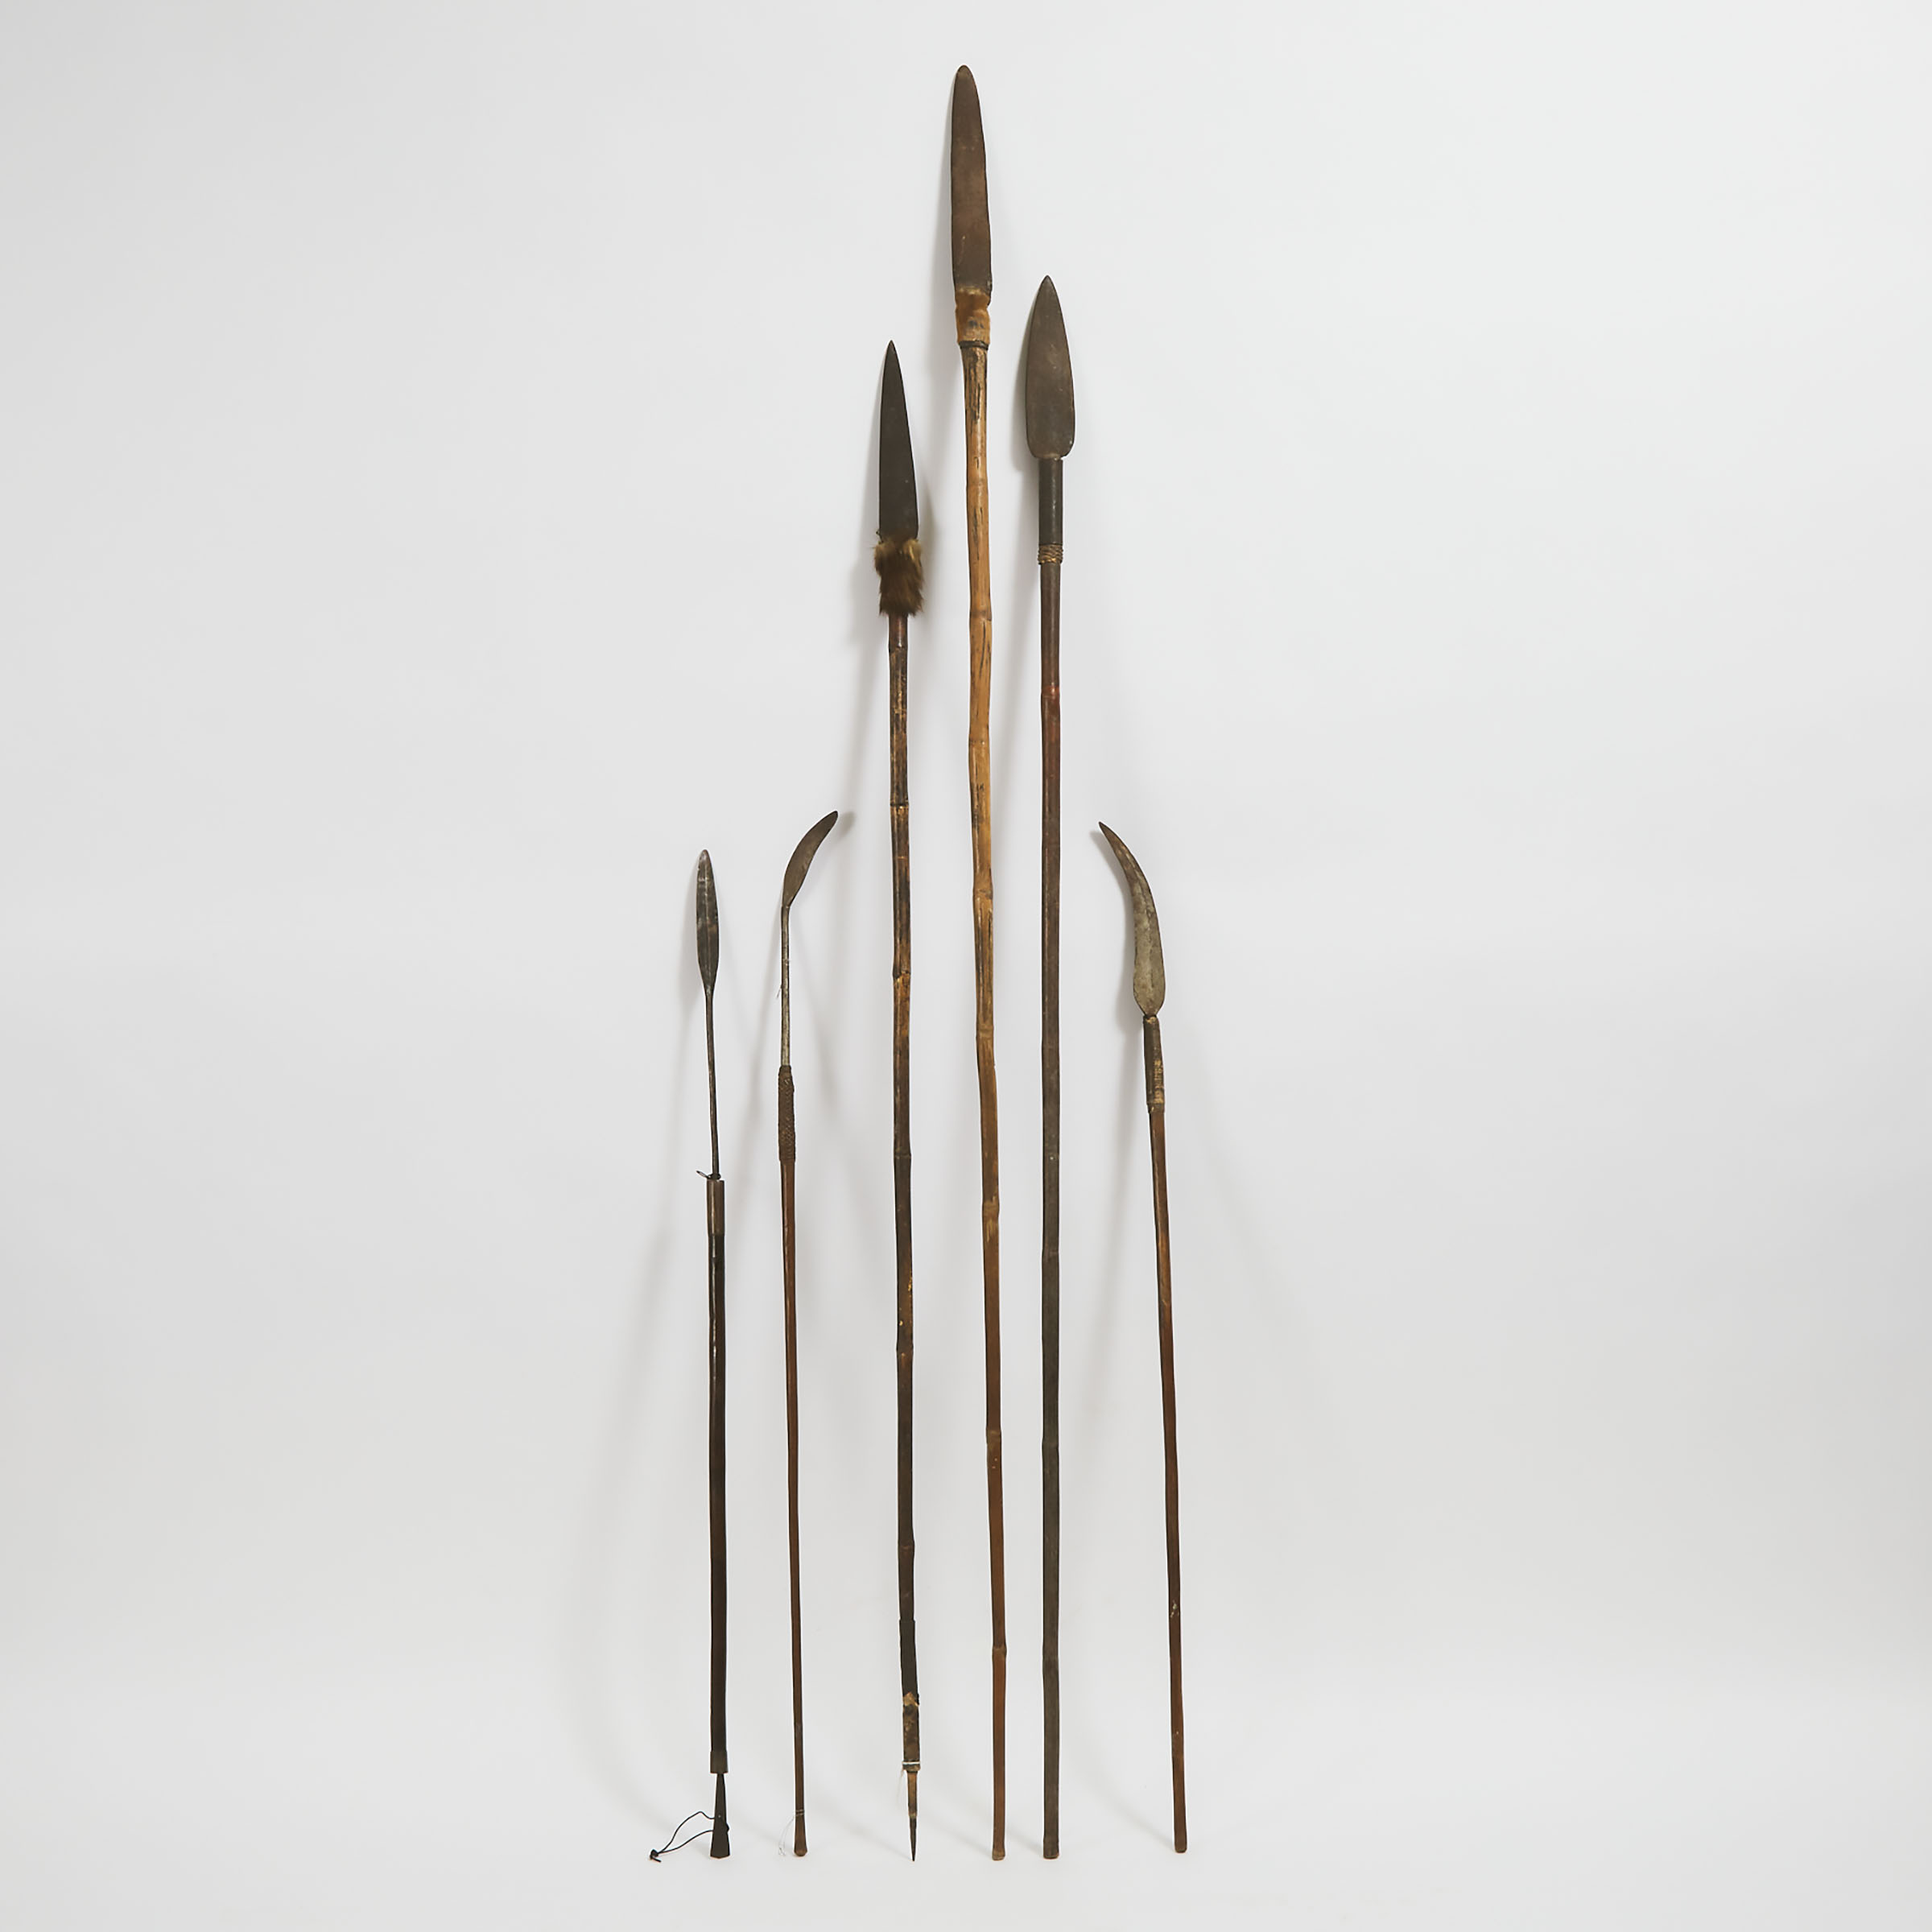 Group of 5 Pacific  Long and Short Spears, possibly East Timor, Indonesia together with a African short spear, 19th/20th century